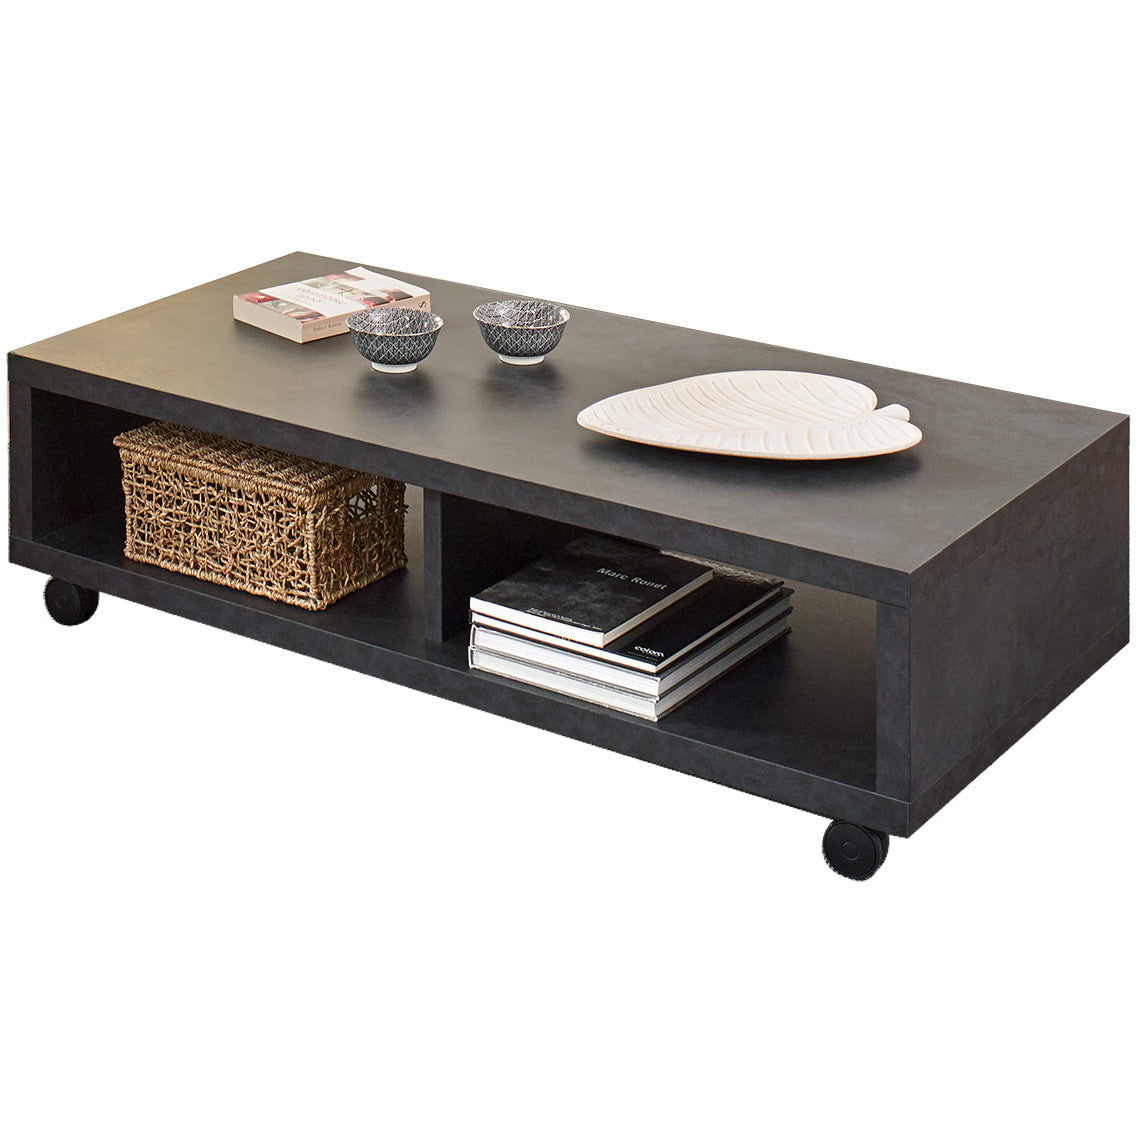 Coffee table | Furniture series Moulin | Natural, black | 120x60